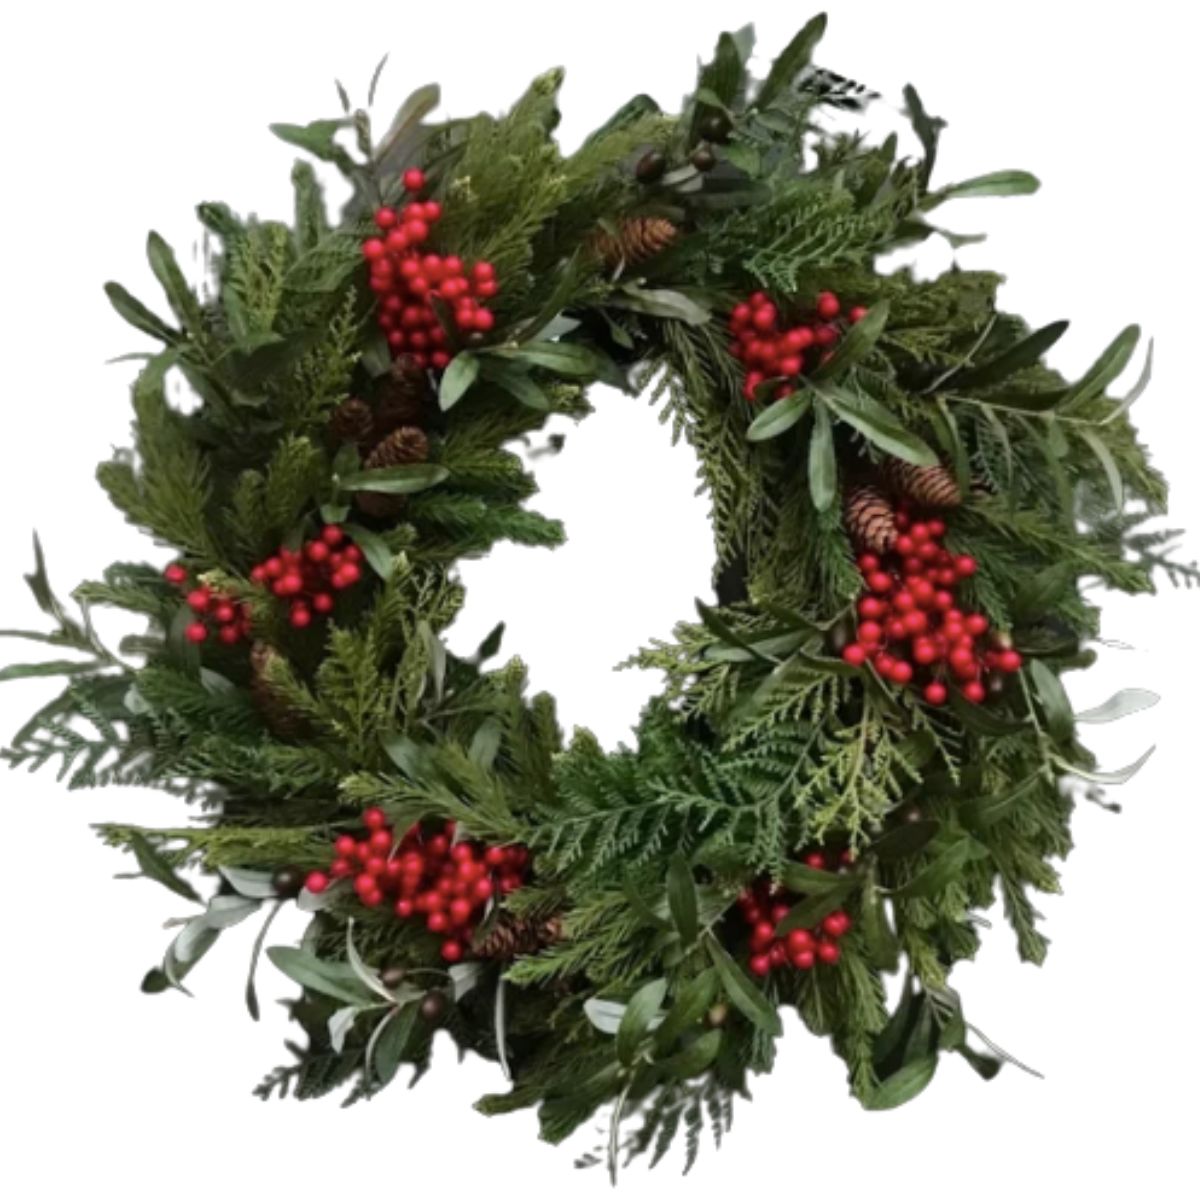 artificial  wreath using evergreens, pine, olive branches, and red berries from etsy